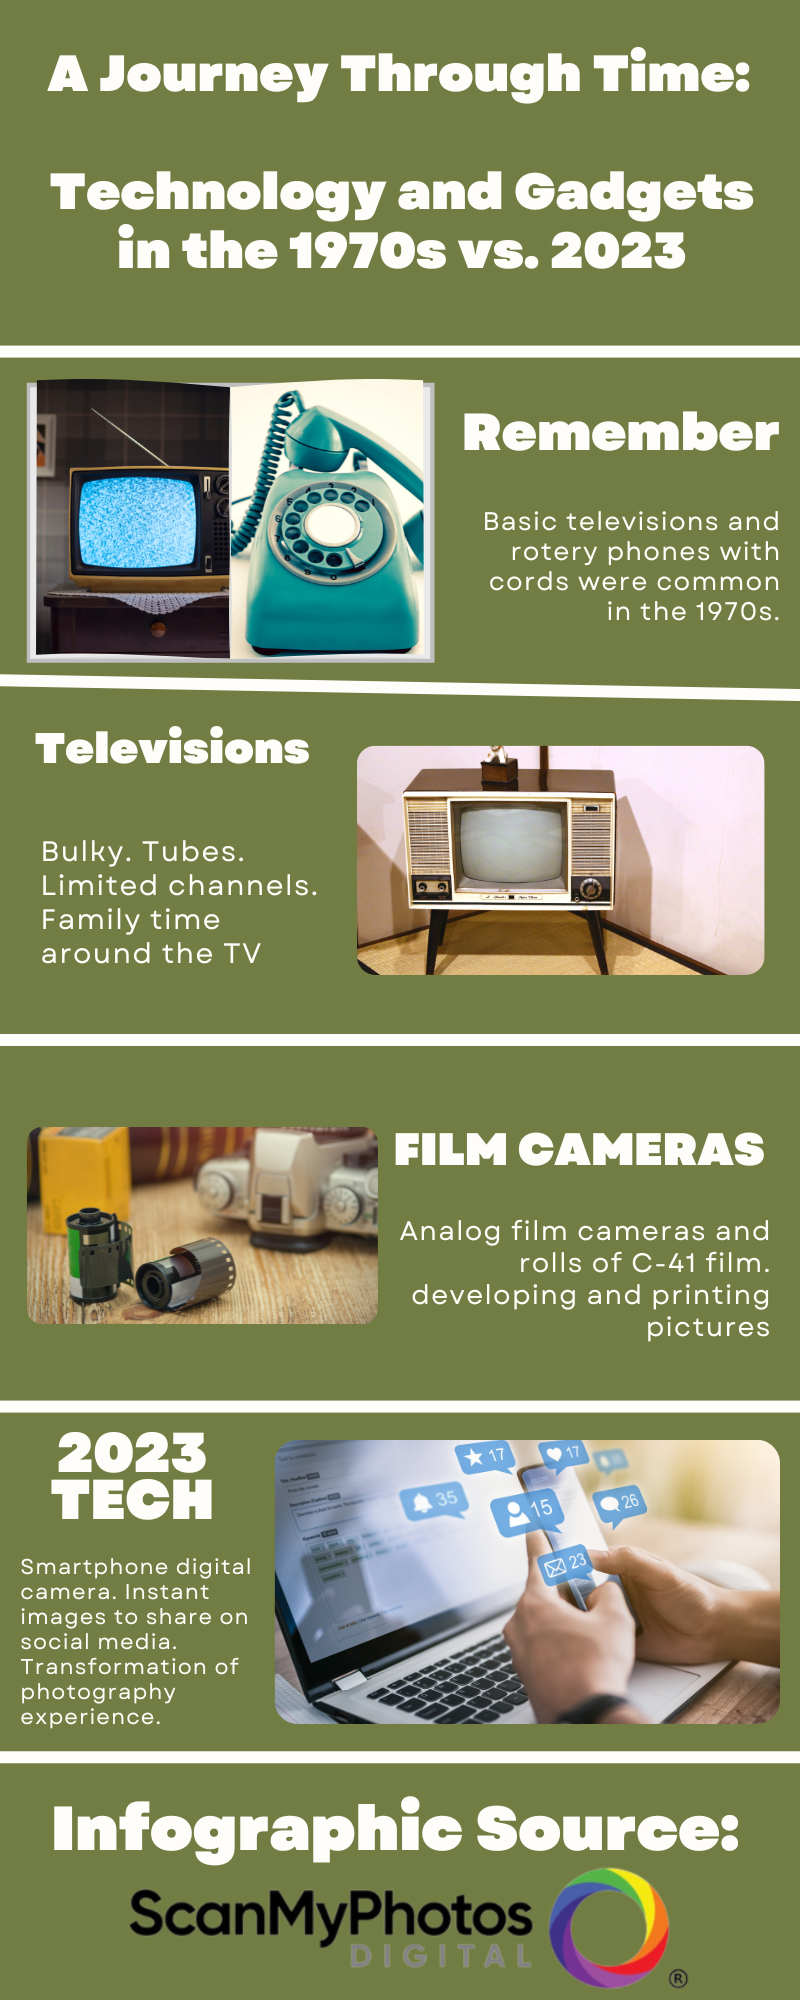 Comparing technology from the 1970s to today (Infographic by ScanMyPhotos.com]